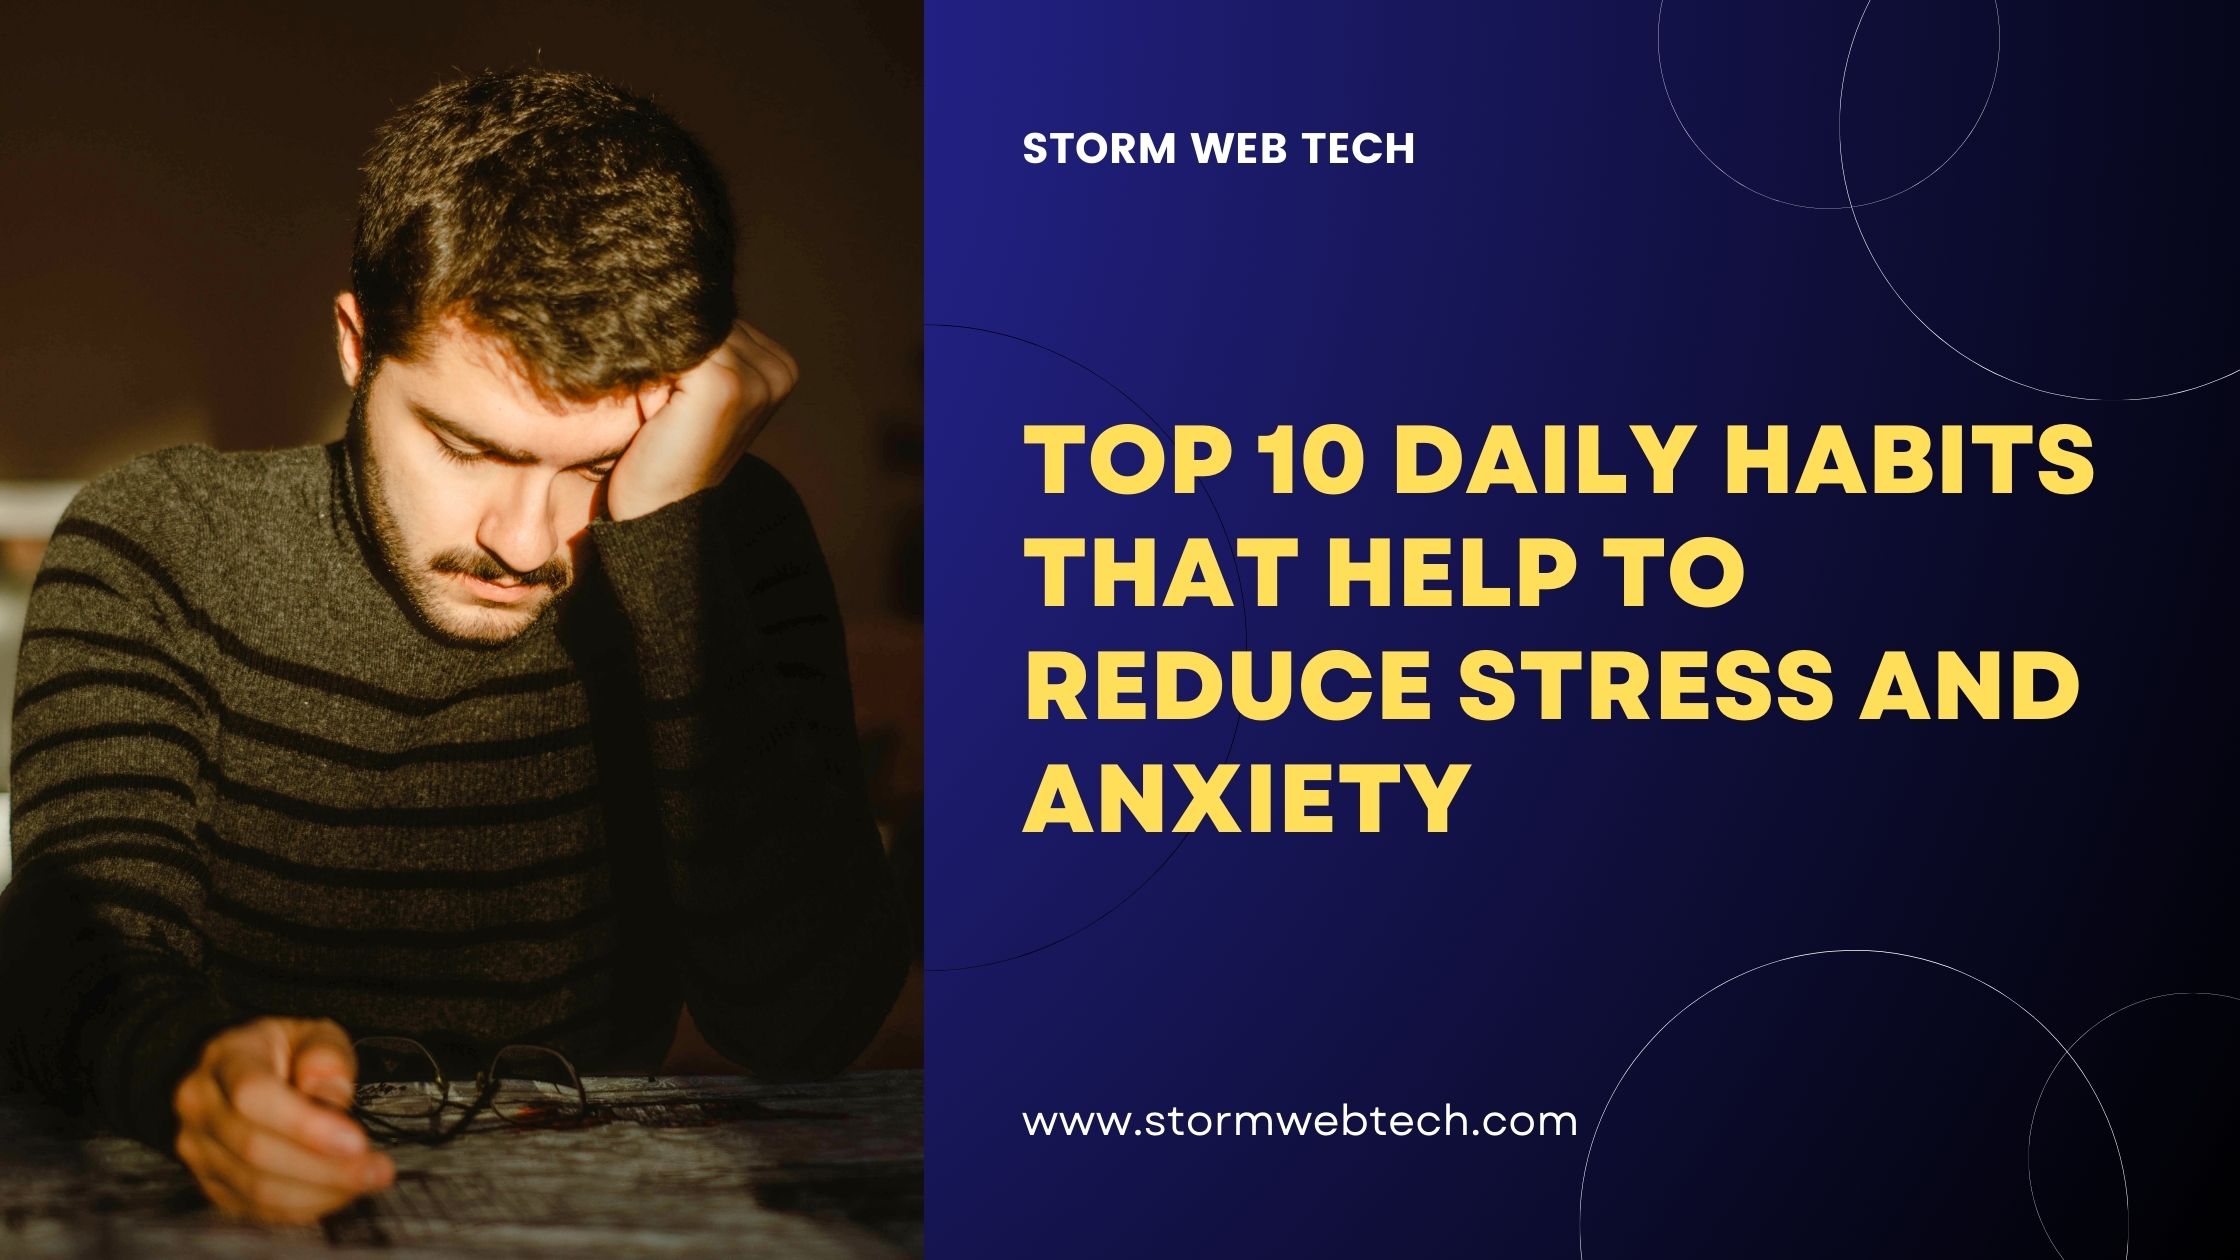 top 10 daily habits that help to reduce stress and anxiety, that can positively impact your mental health.